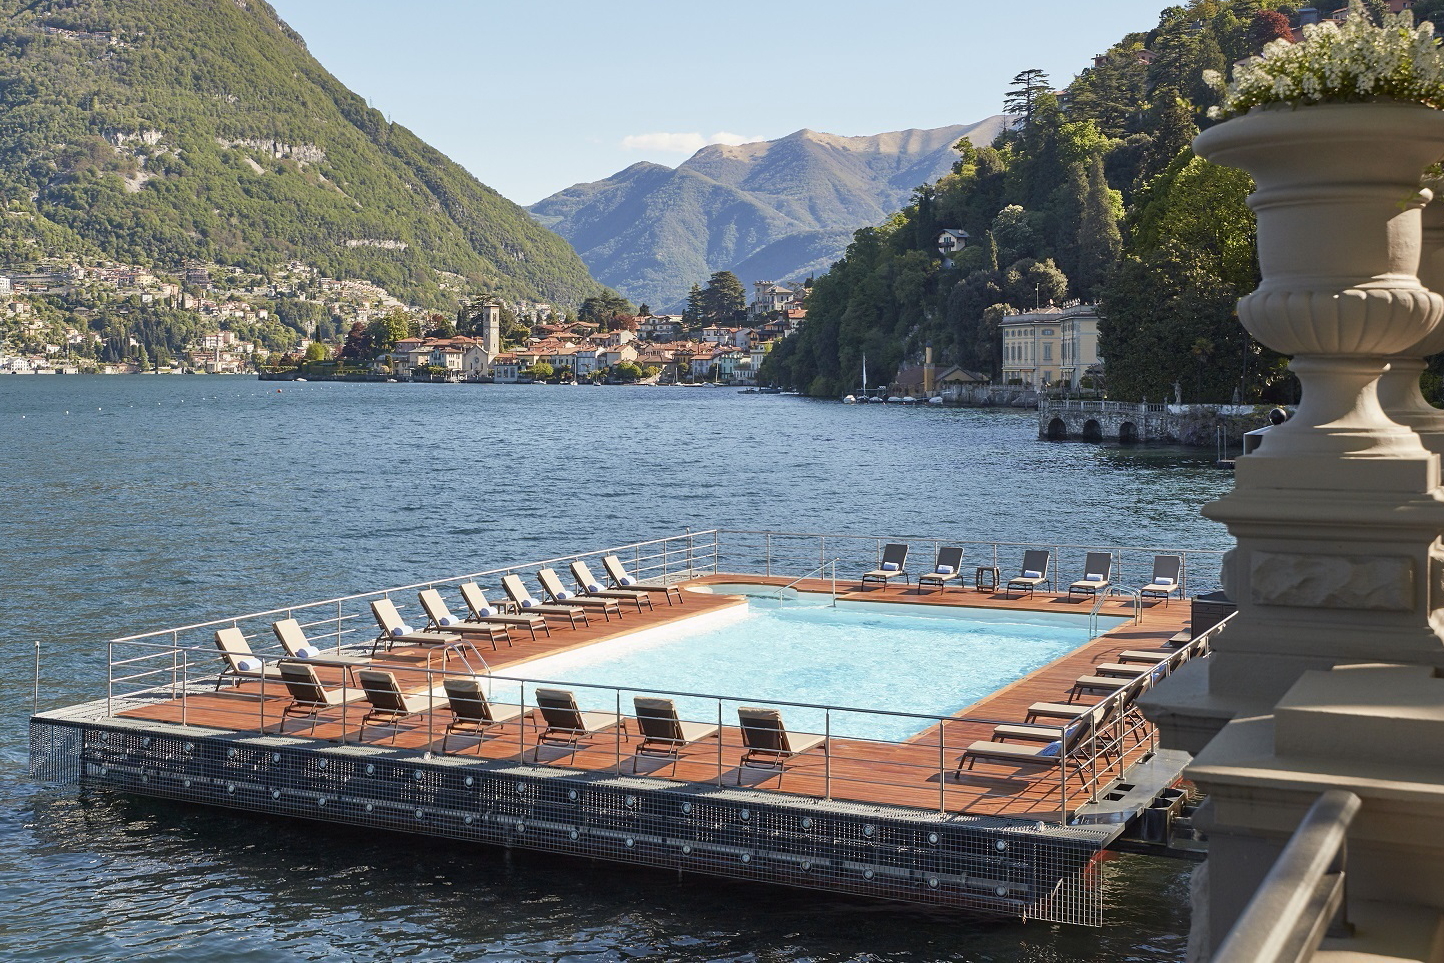 Pool with a view at Mandarin Oriental Lago di Como. Click to enlarge.